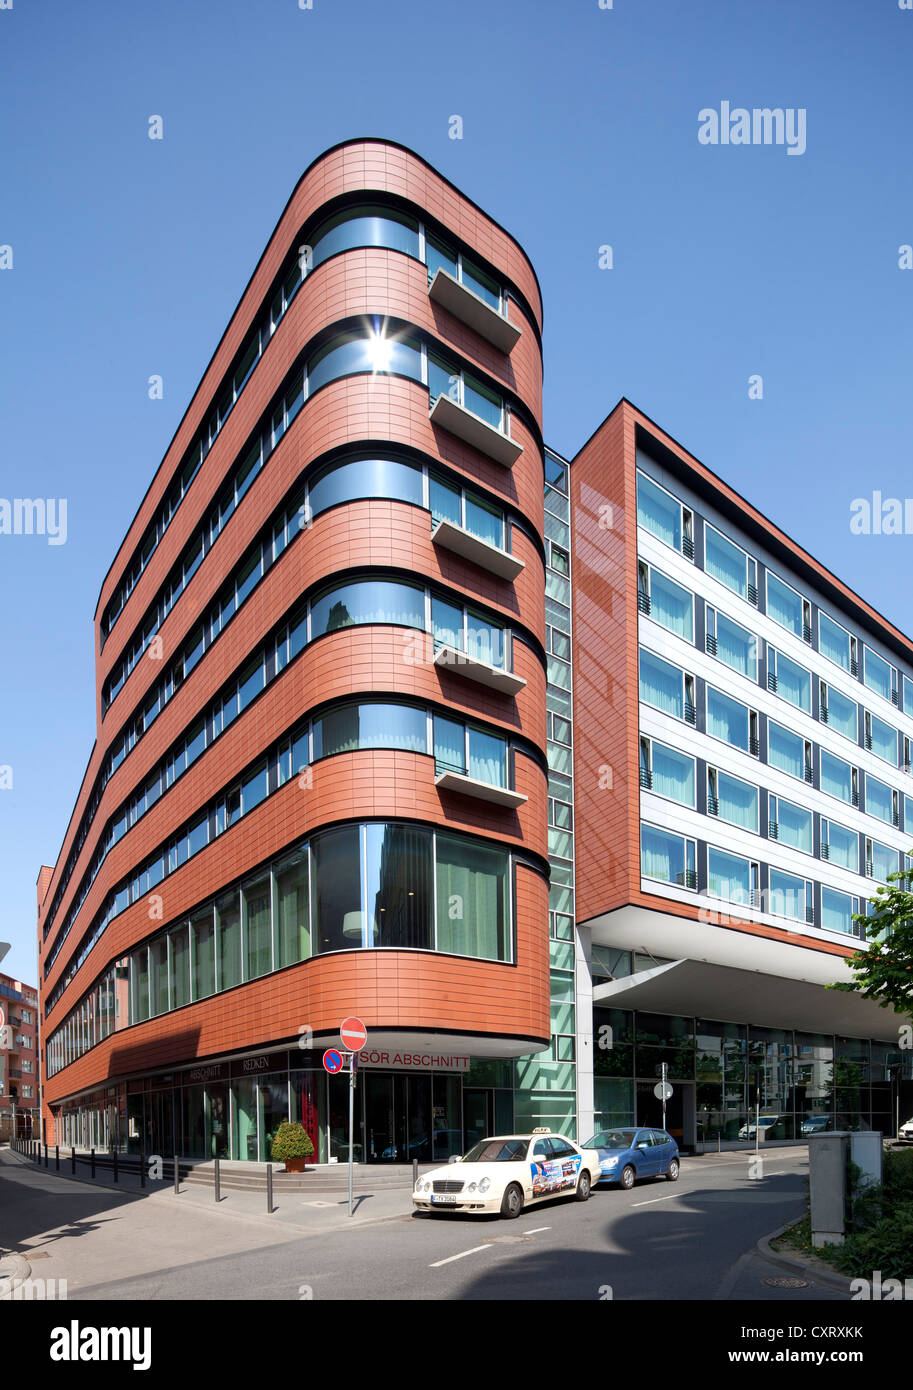 NH Hotel and office building, Frankfurt am Main, Hesse, Germany, Europe, PublicGround Stock Photo